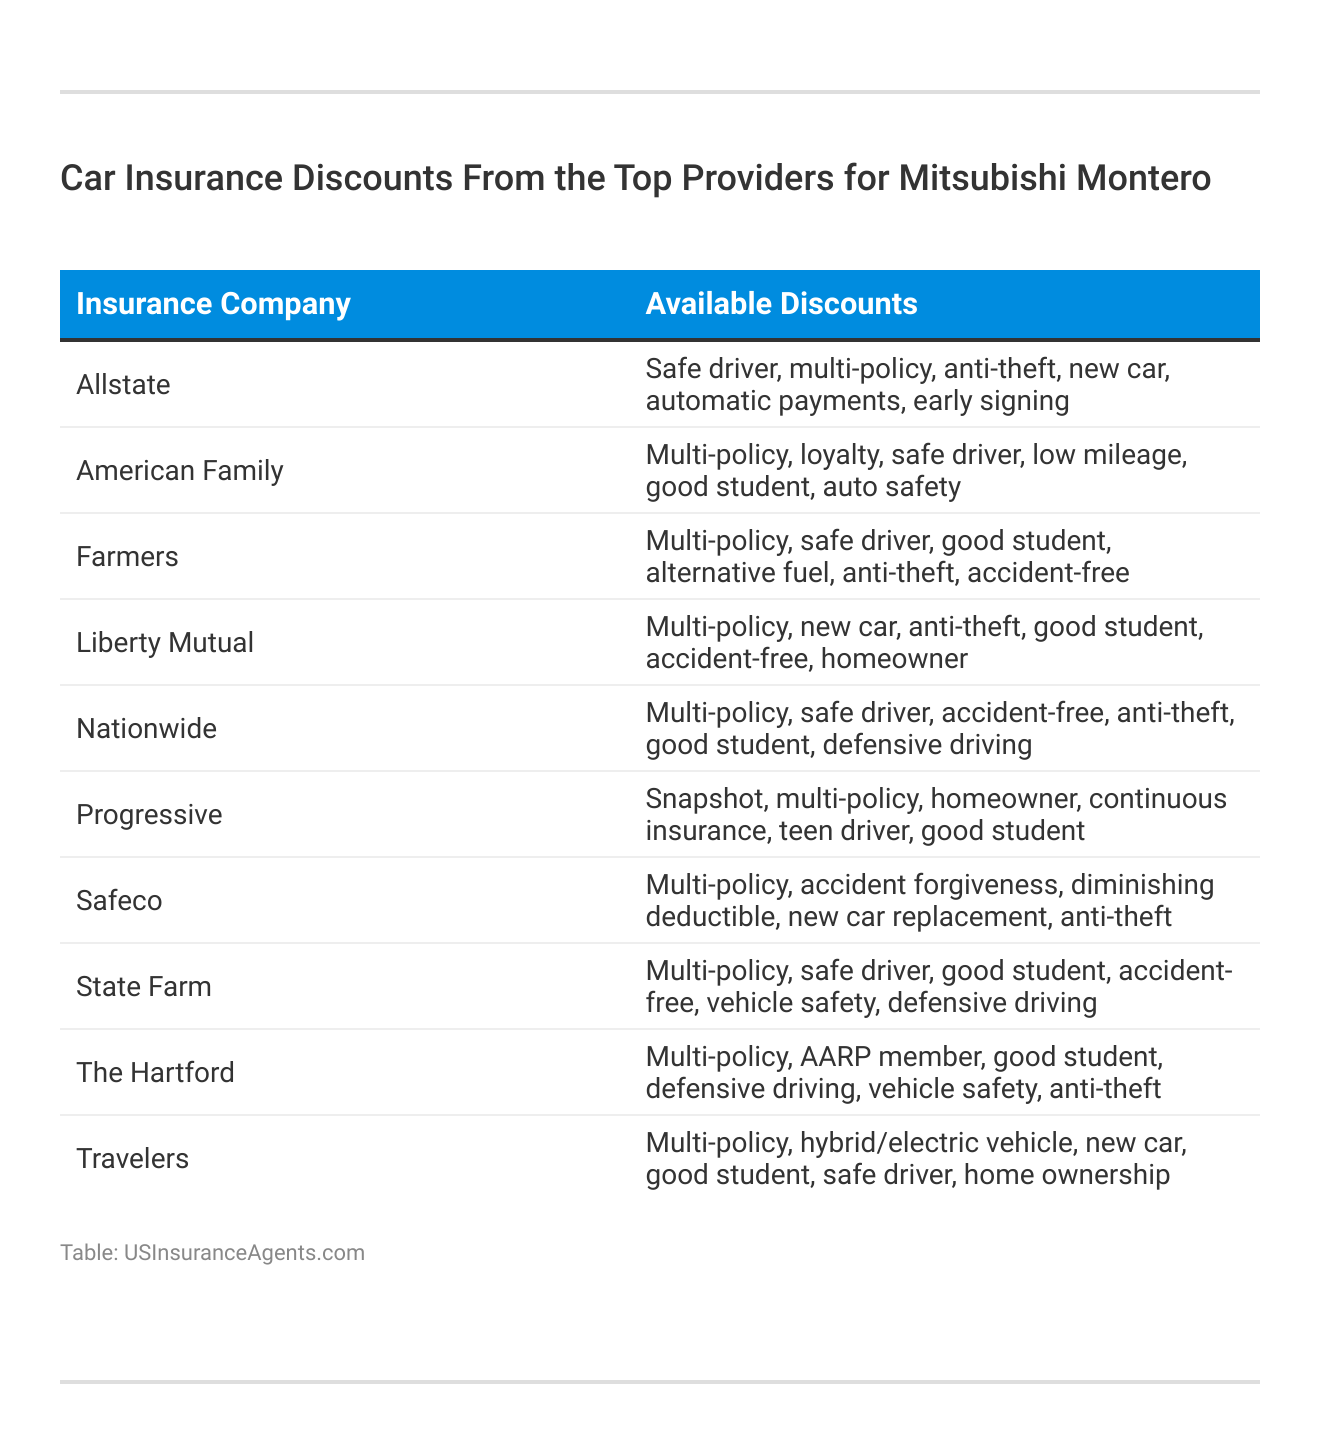 <h3>Car Insurance Discounts From the Top Providers for Mitsubishi Montero</h3>